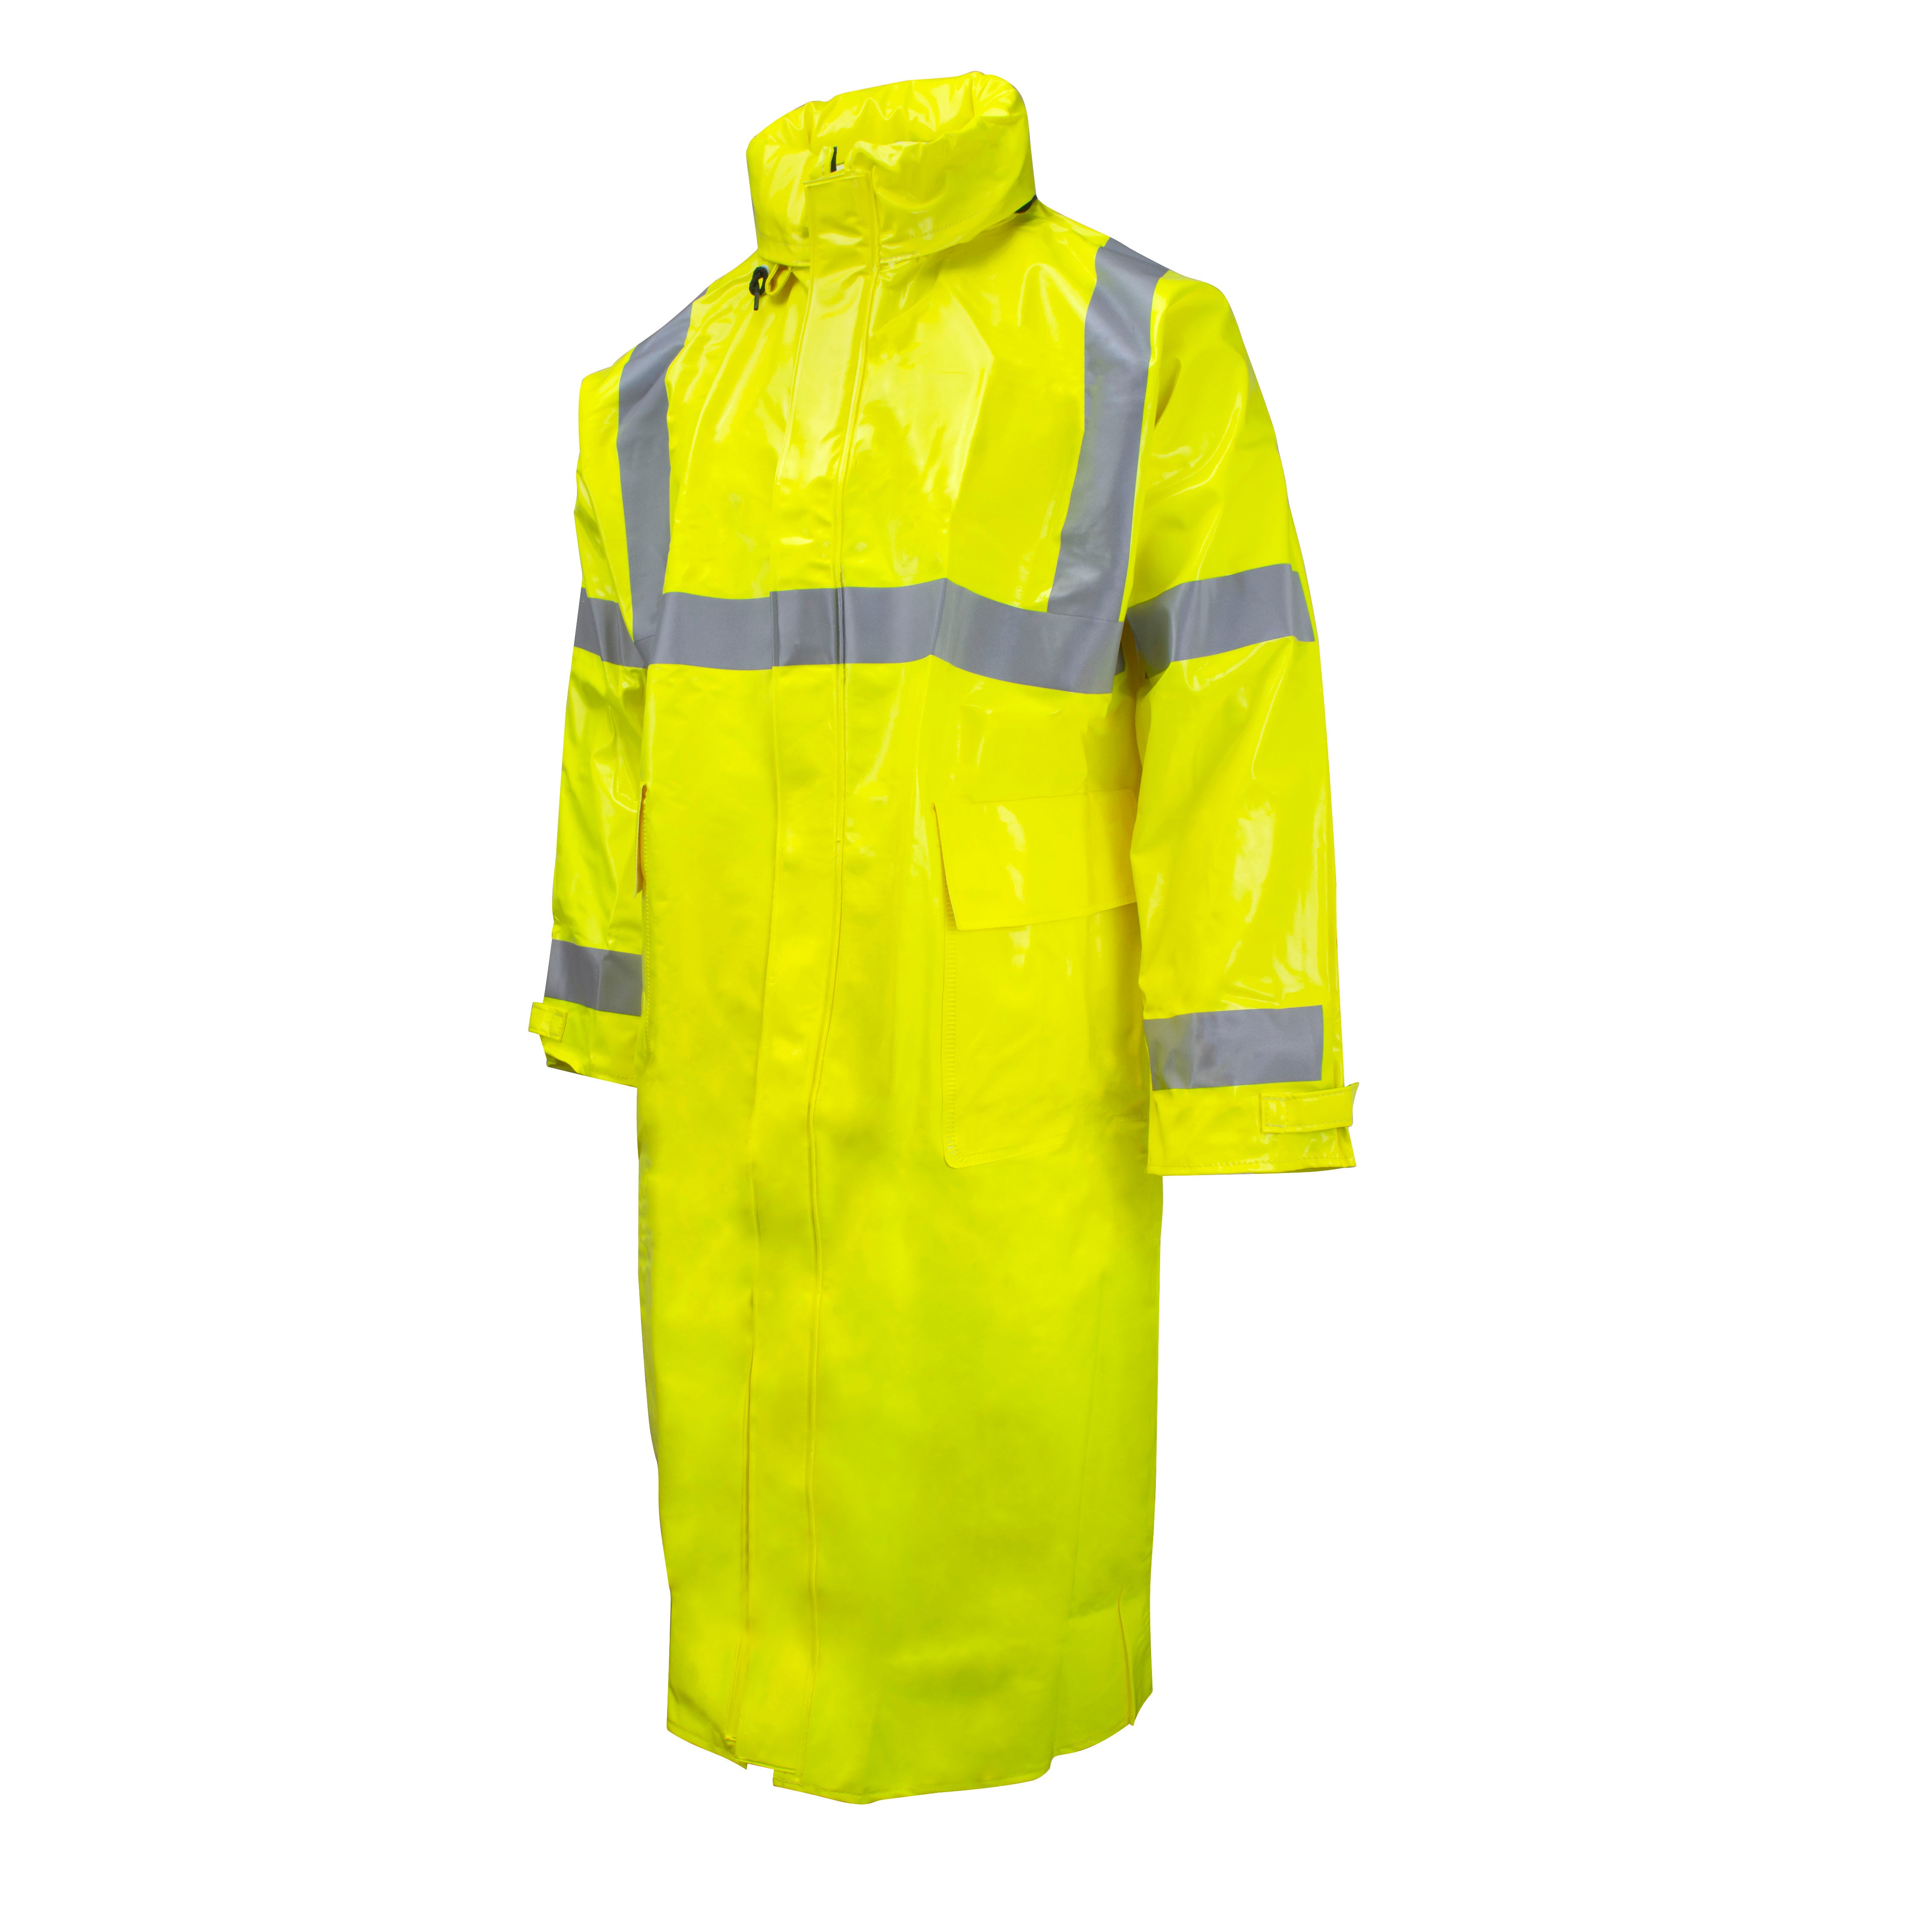 Neese 227AC Dura Arc I Coat with Attached Hood-eSafety Supplies, Inc